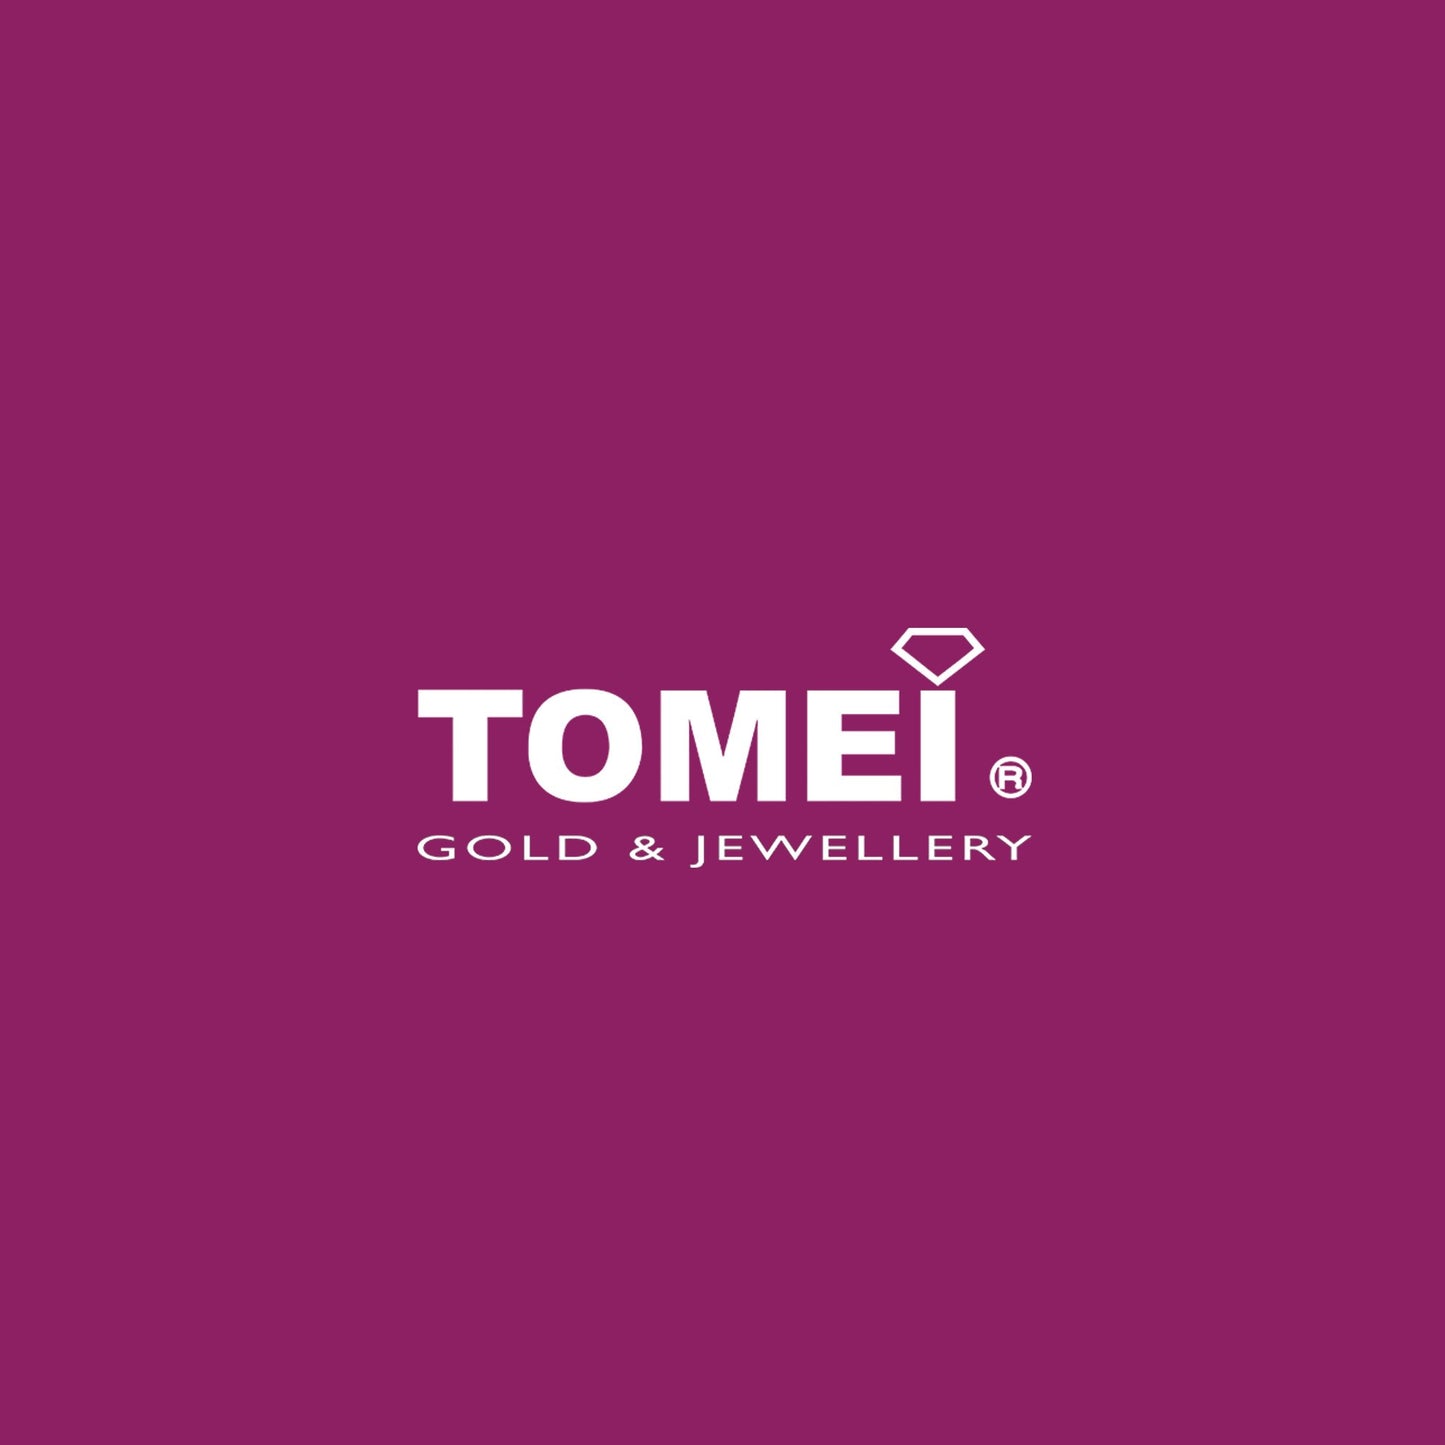 TOMEI Glamorous Spectacle of Intertwined Hearts Diamond Ring | White Gold & Rose Gold 585 (14K) (R4870)